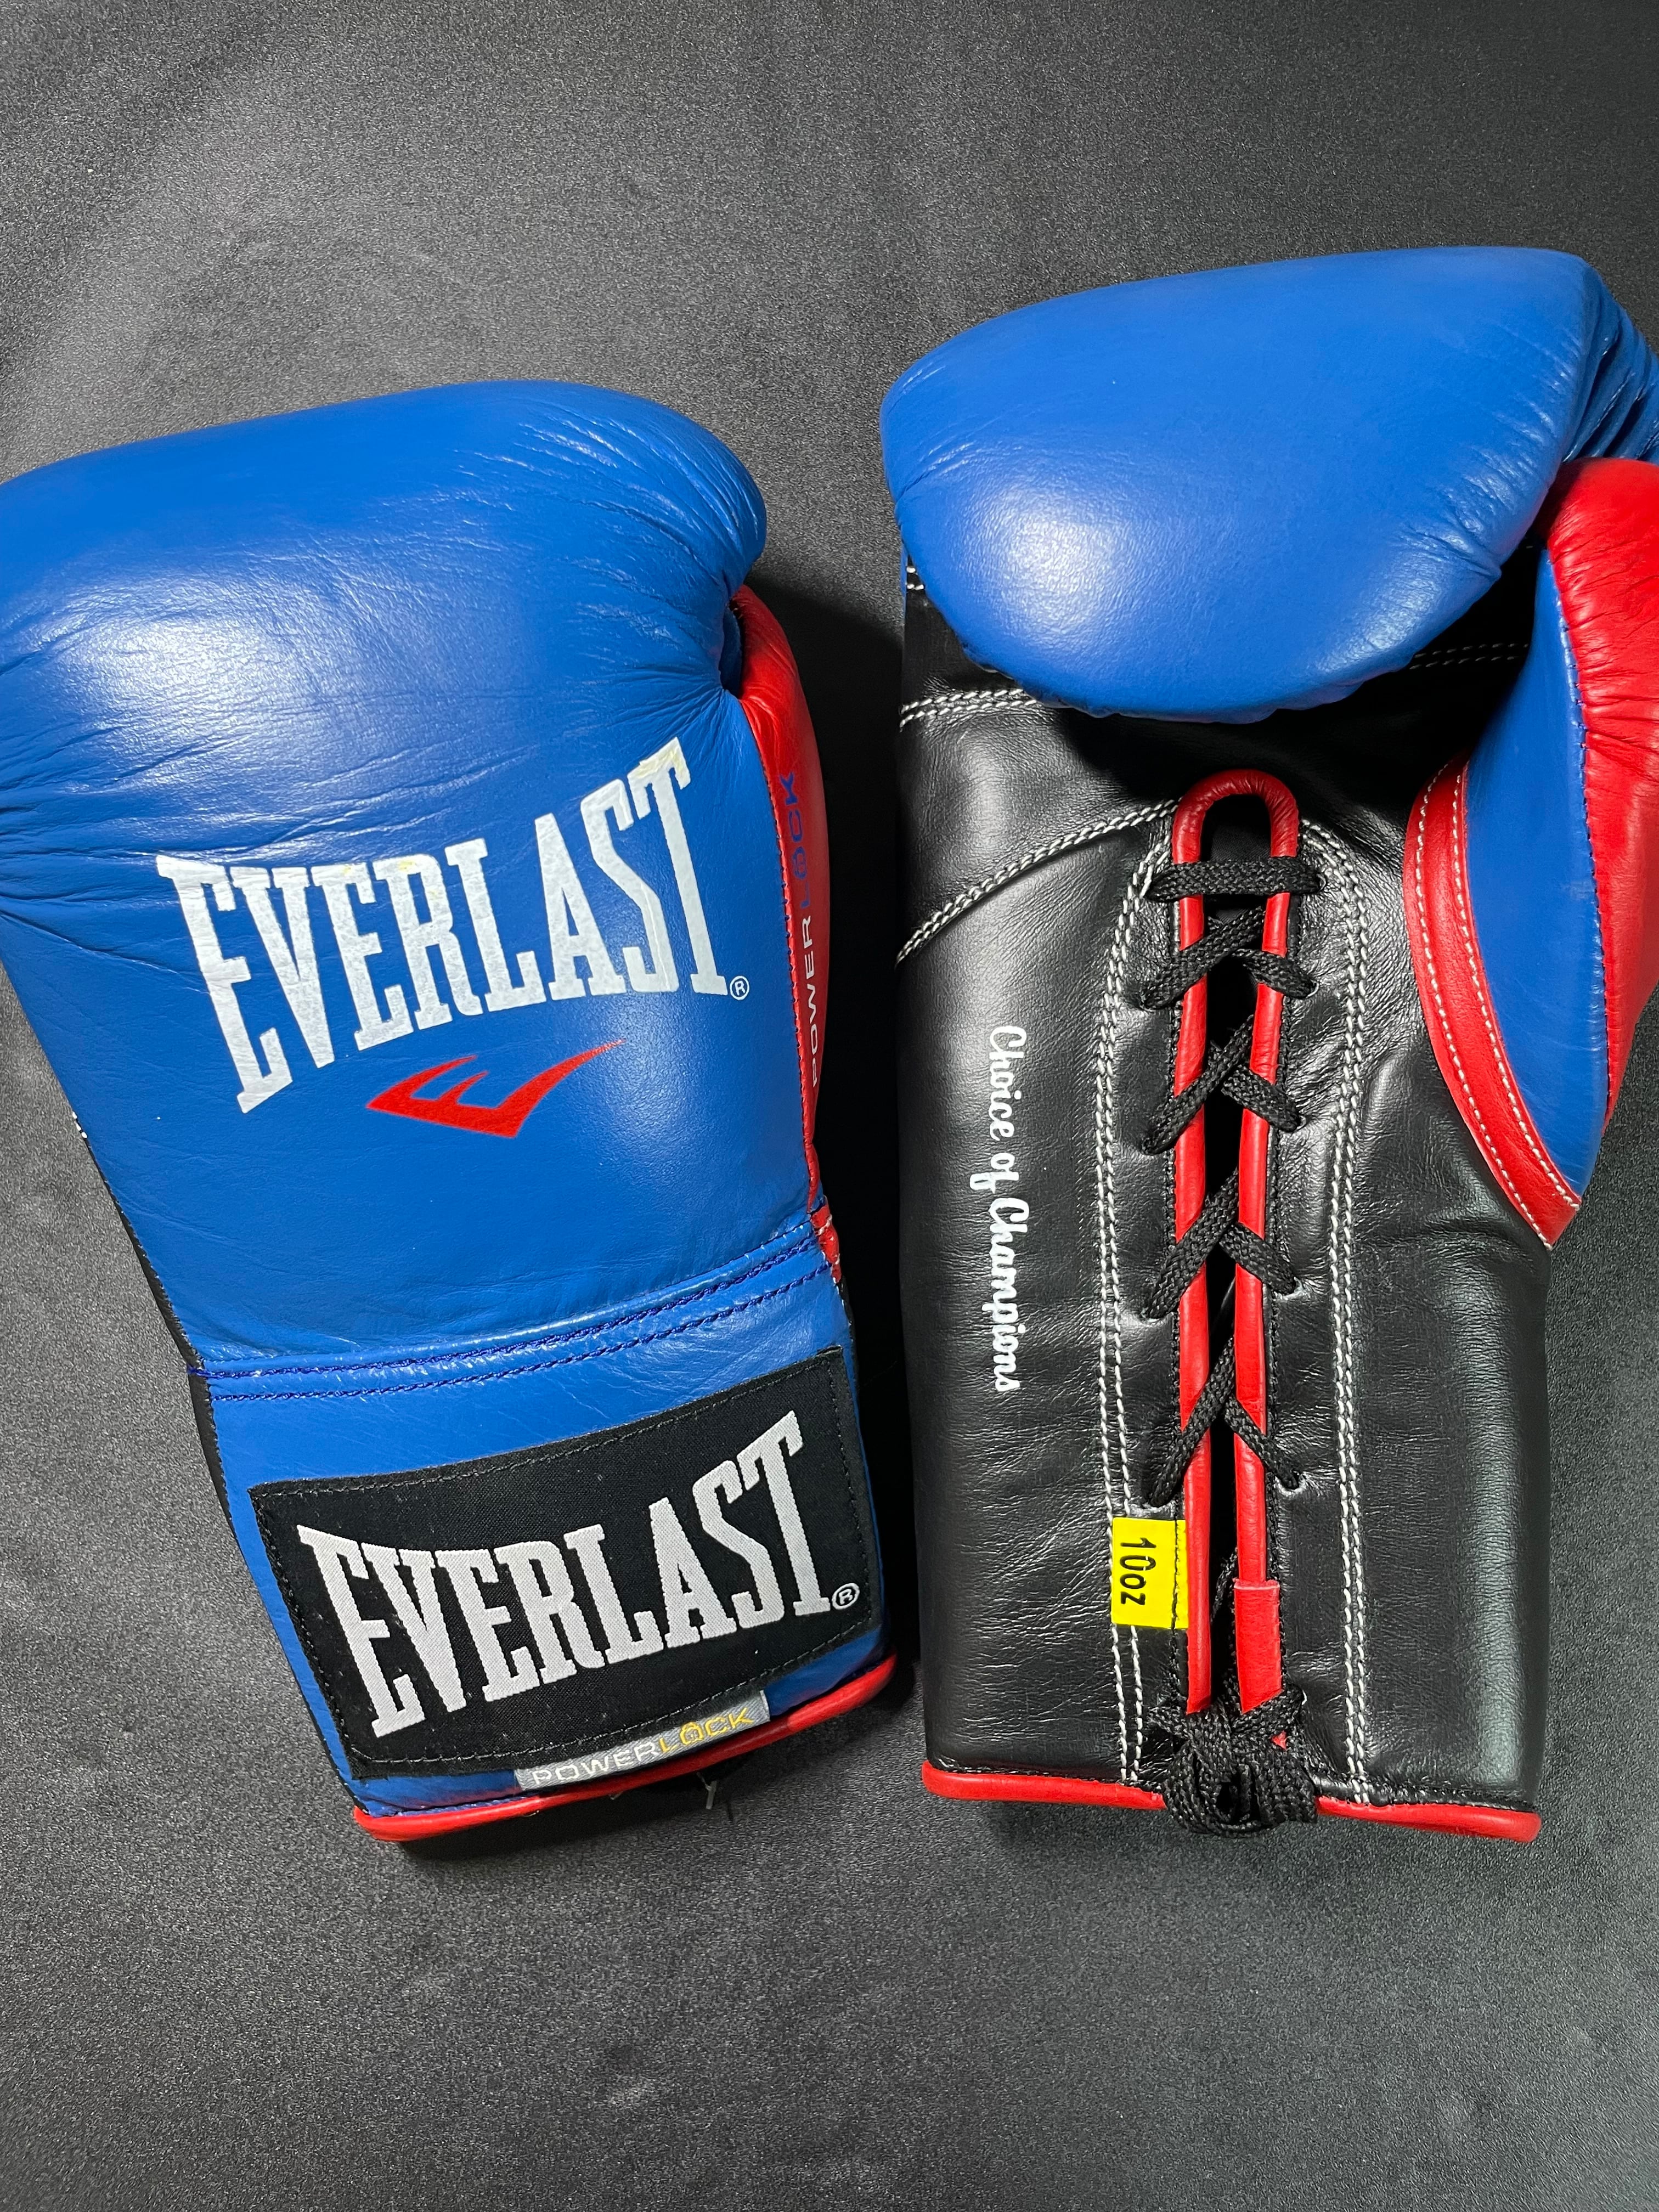 Everlast パワーロックプロファイトグローブ 青/赤 | ボクシング格闘技専門店　OLDROOKIE powered by BASE